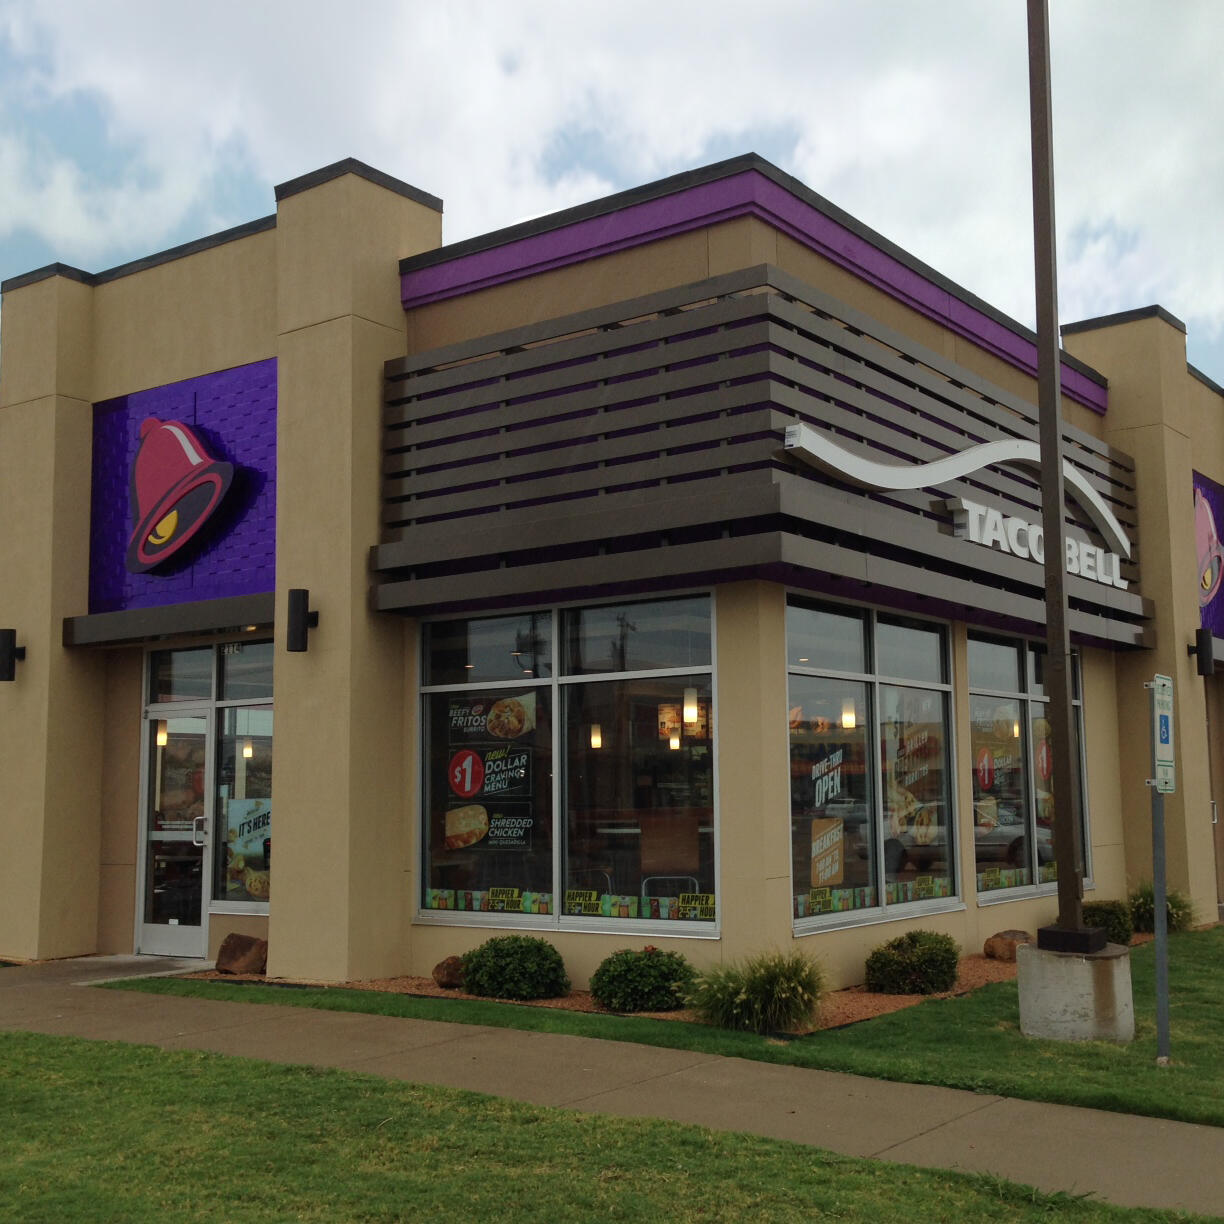 Mesquite Texas Investment property sold - Taco Bell